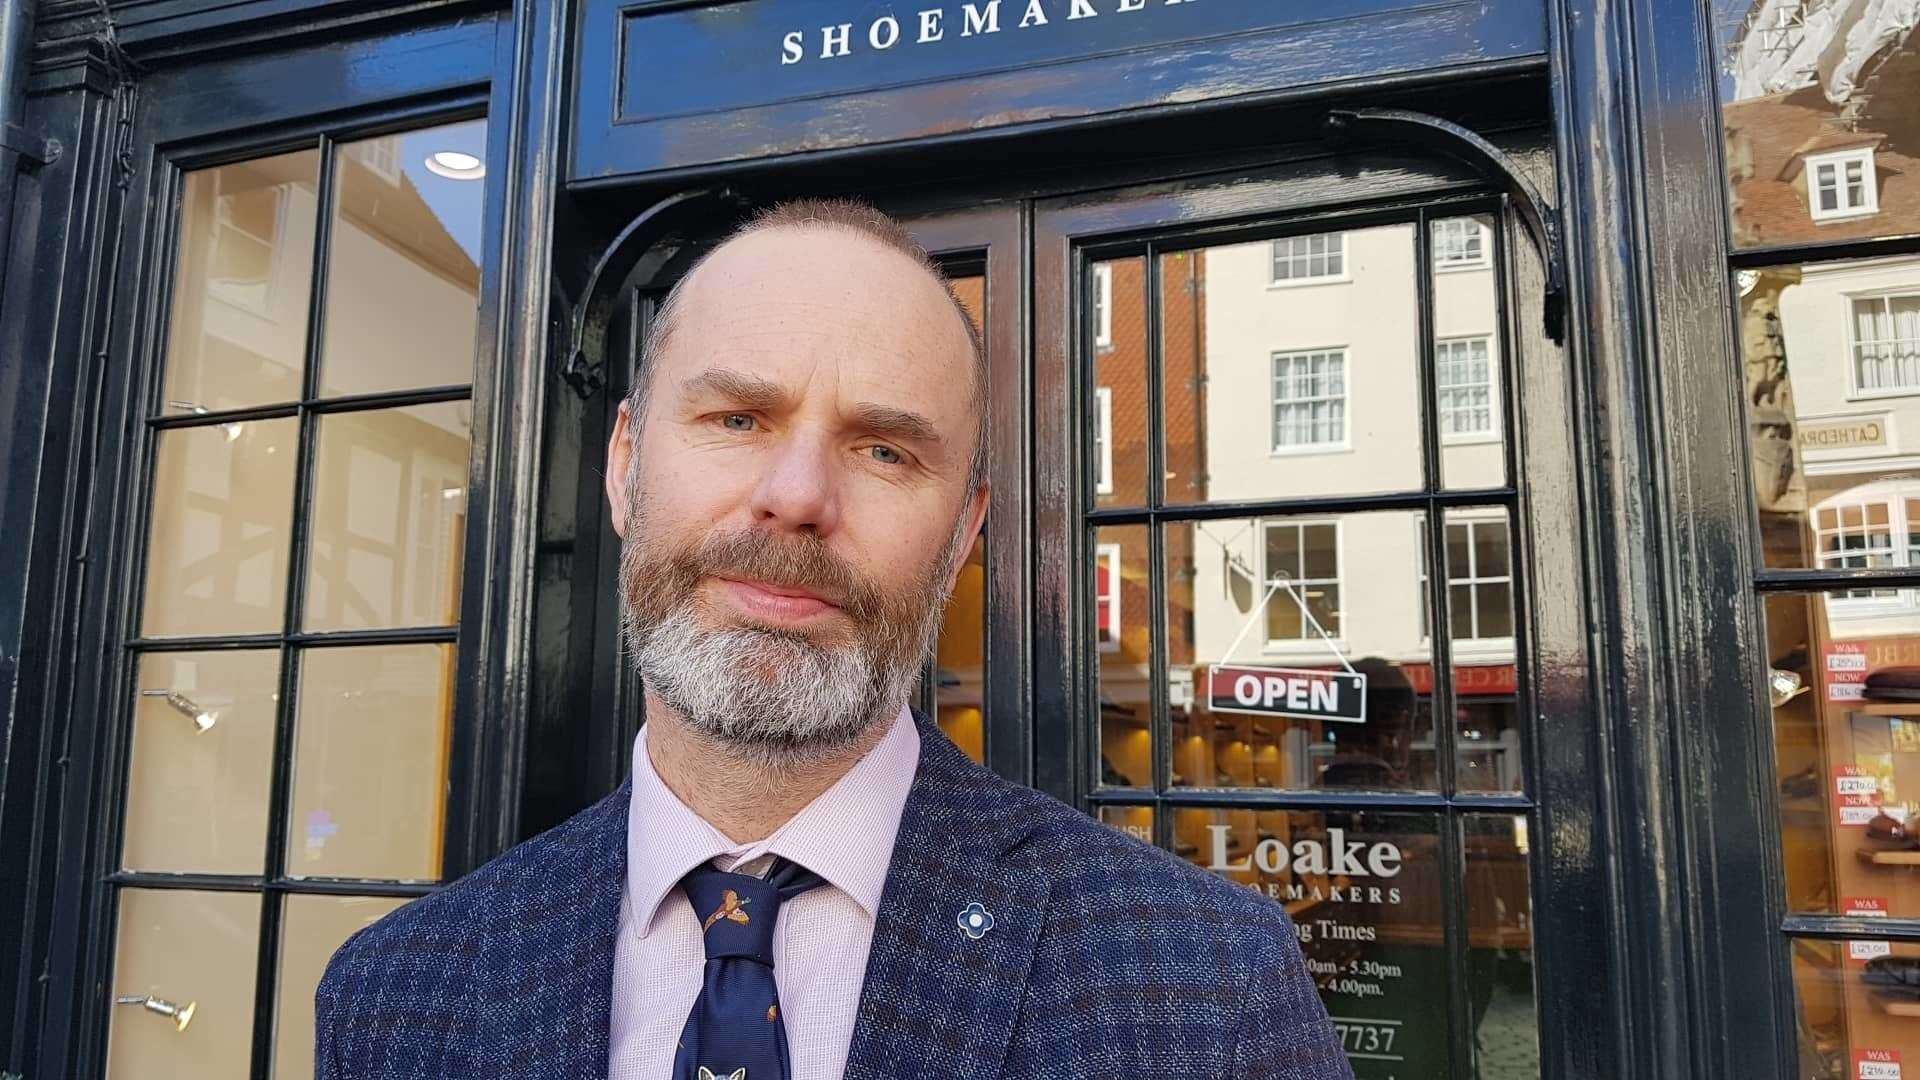 Mark Pegg, head of business at The Brogue Trader which works in partnership with Loake shoemakers